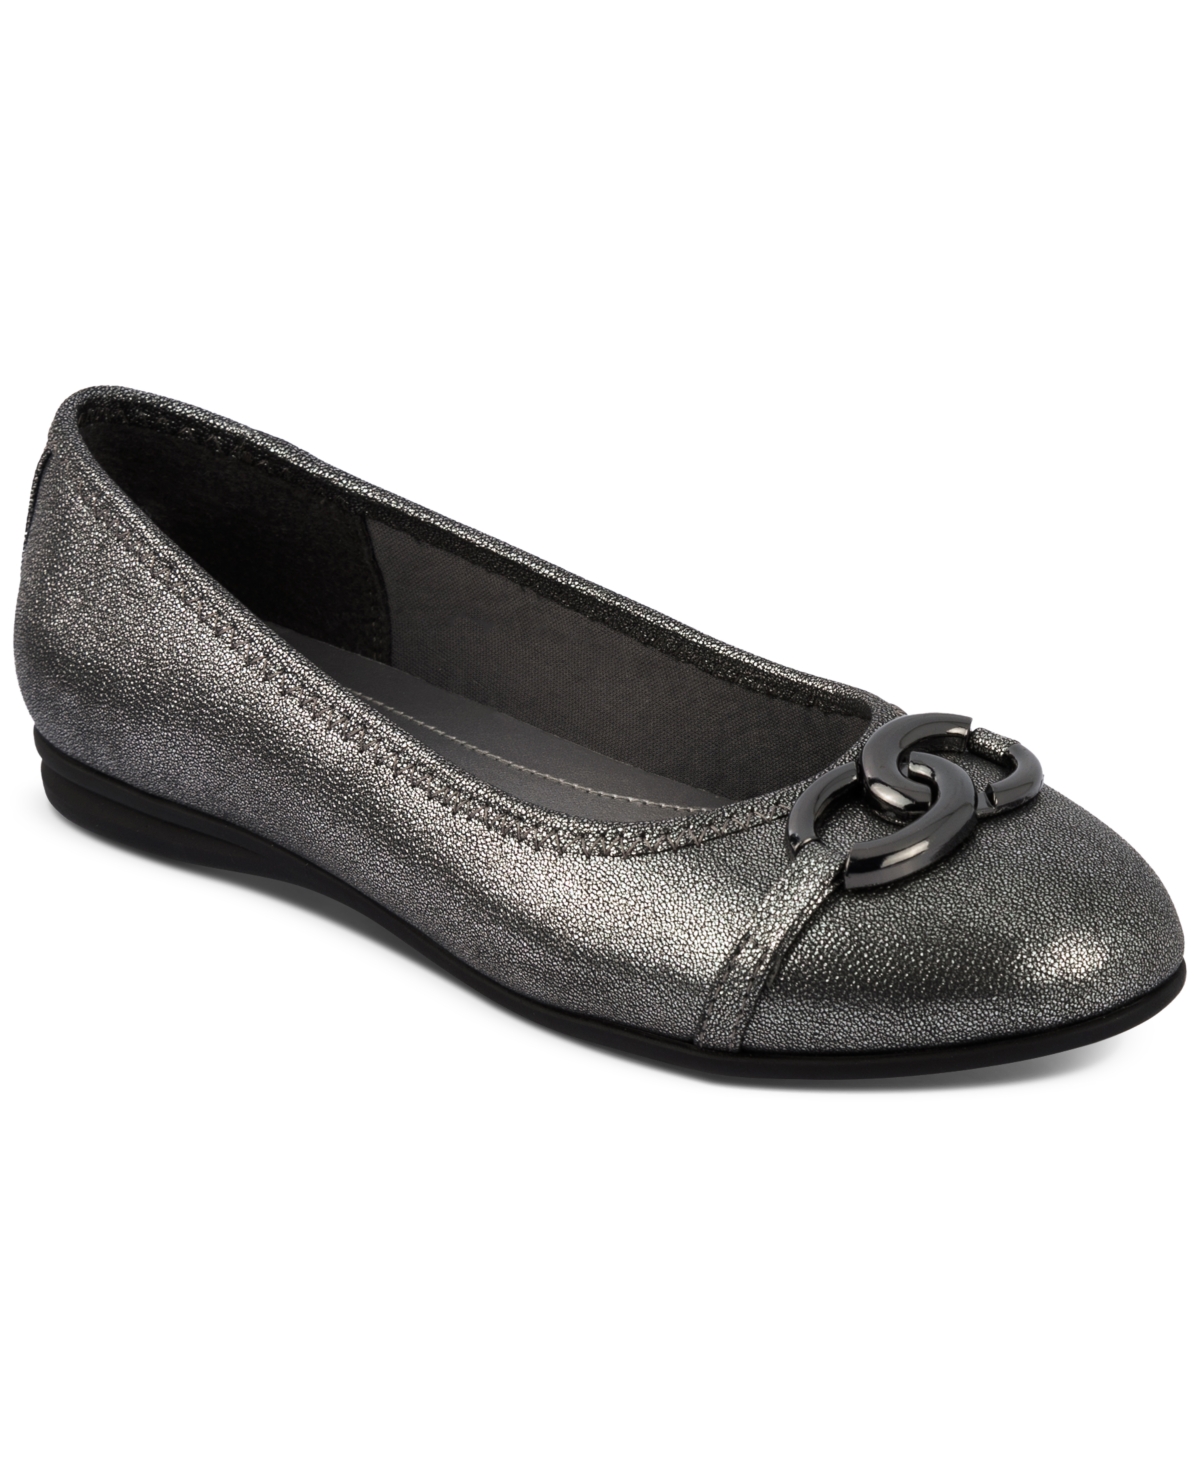 Amandaa Flats, Created for Macy's - Pewter